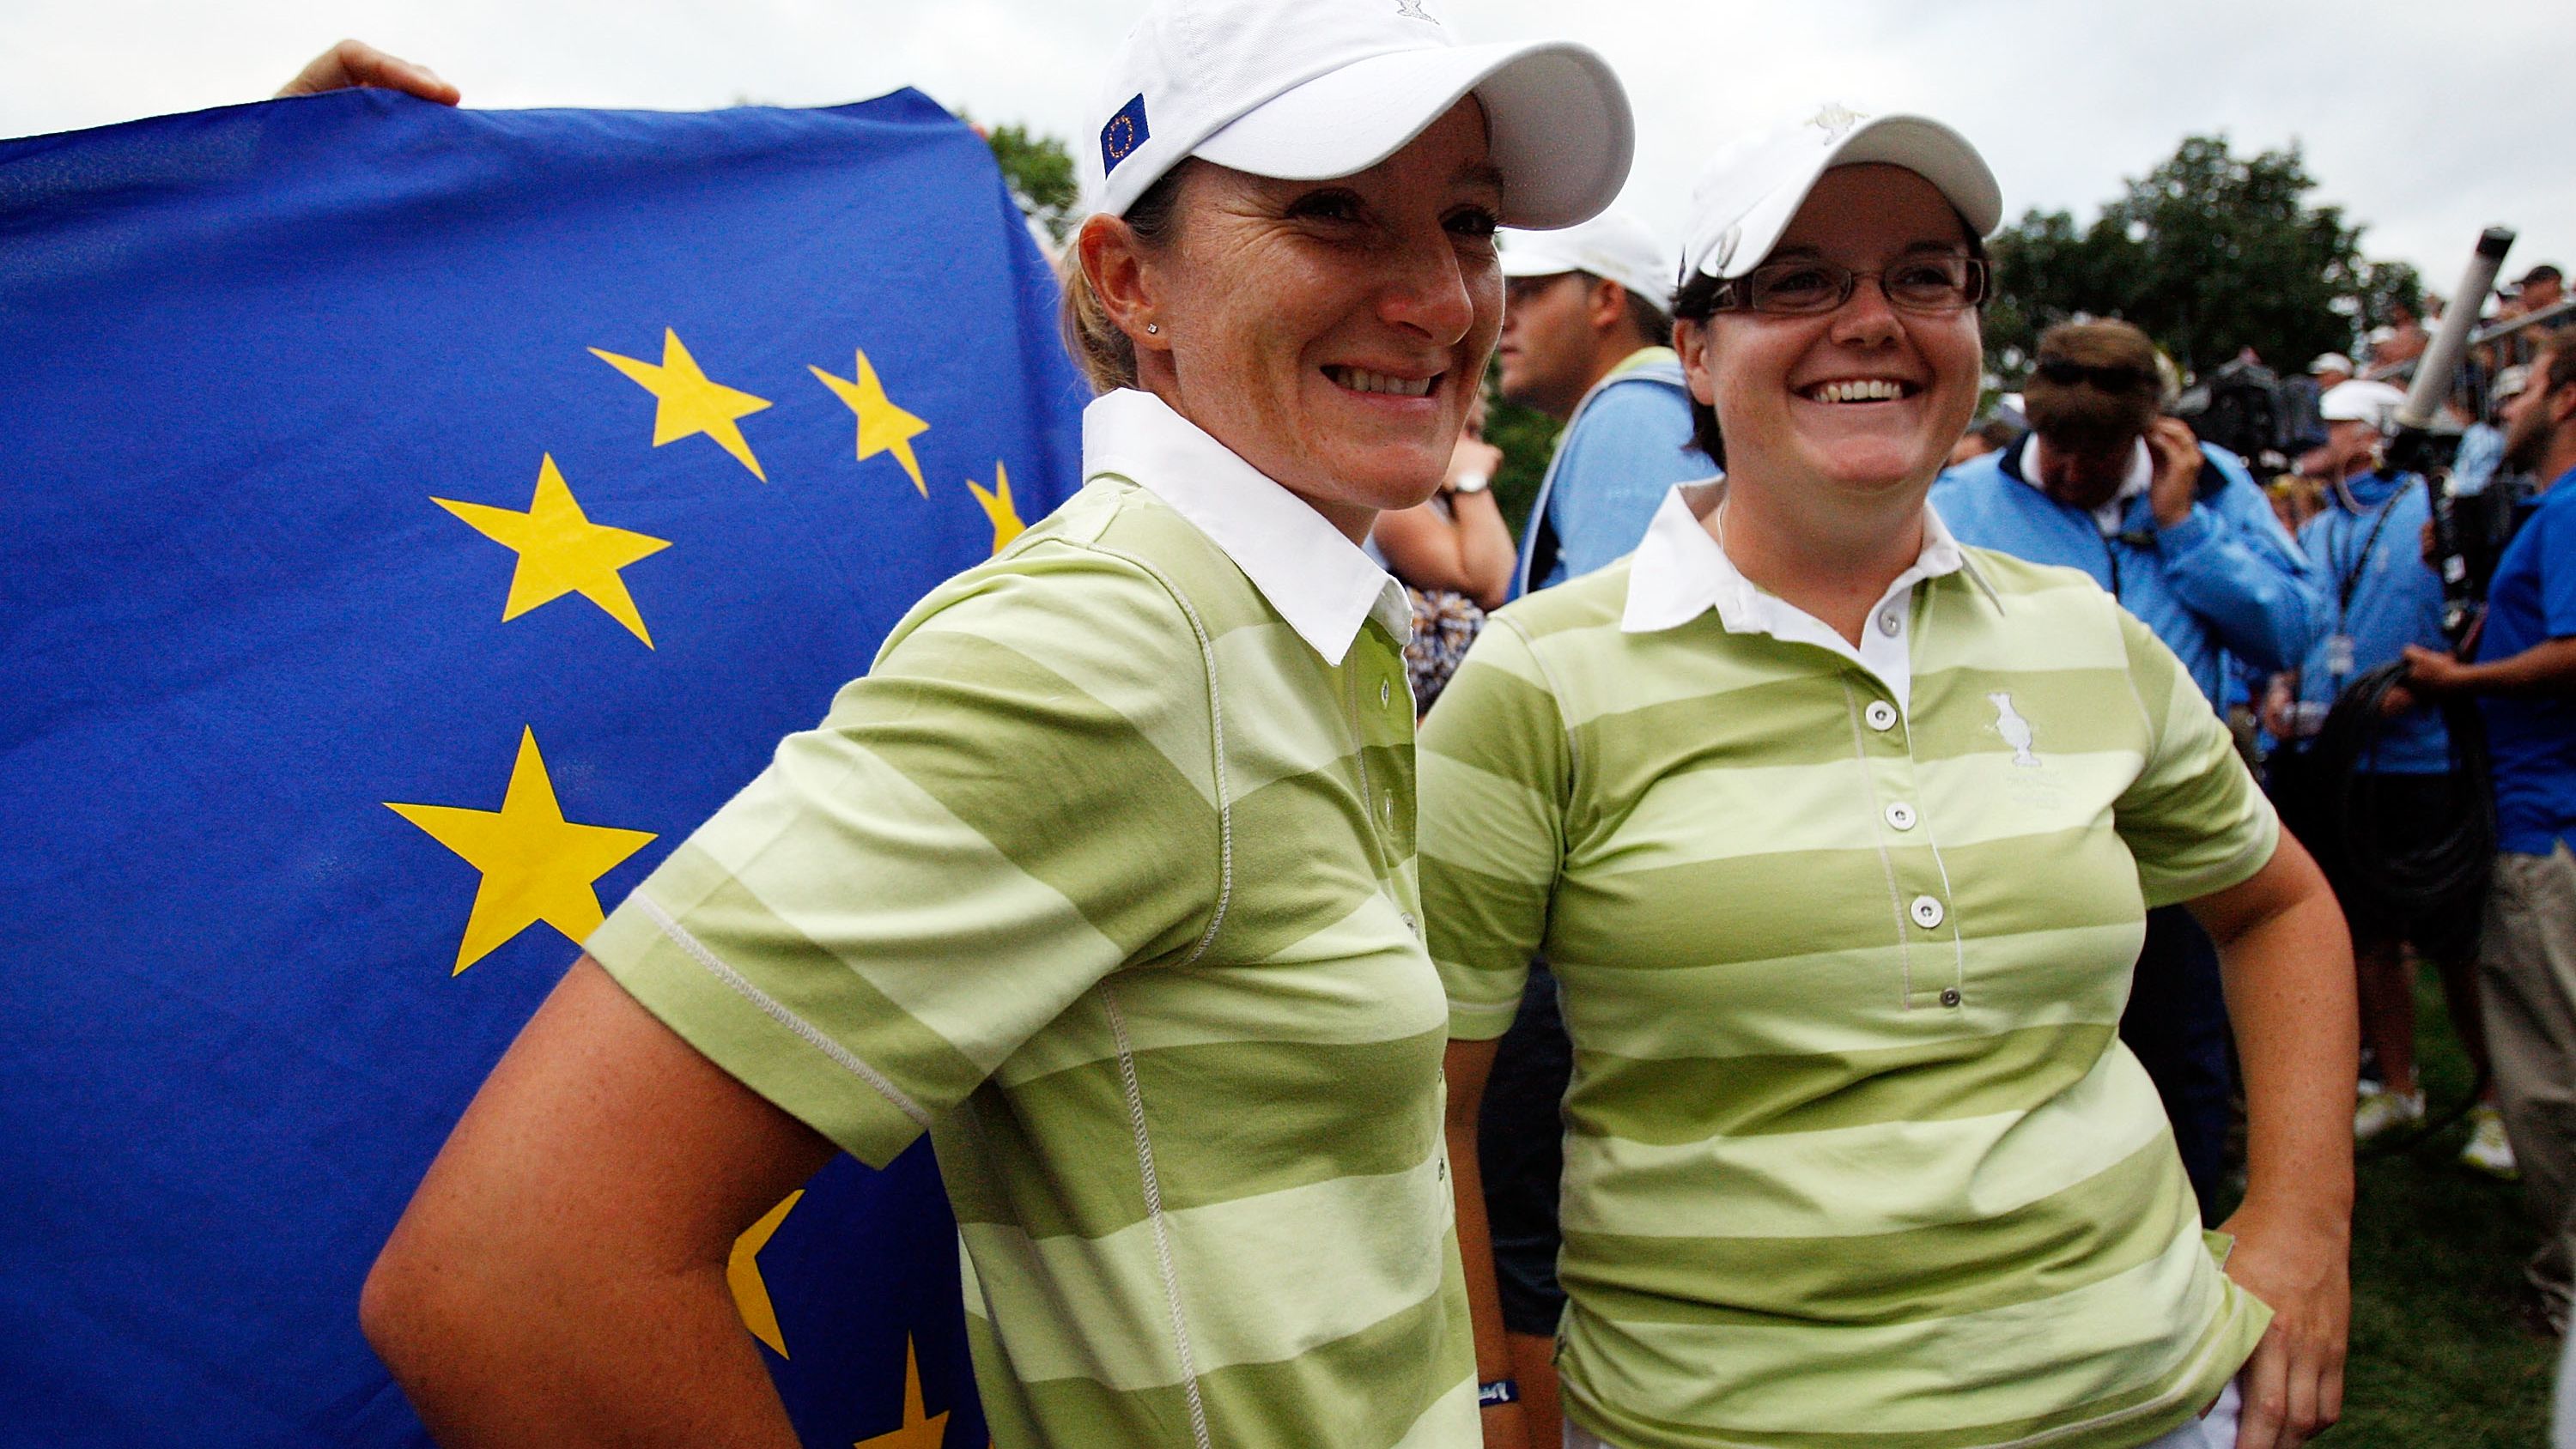 European teammates Gwladys Nocera (L) and Brewerton (R) after defeating the US Team pair in the 2009 Solheim Cup at Rich Harvest Farms, Illinois.